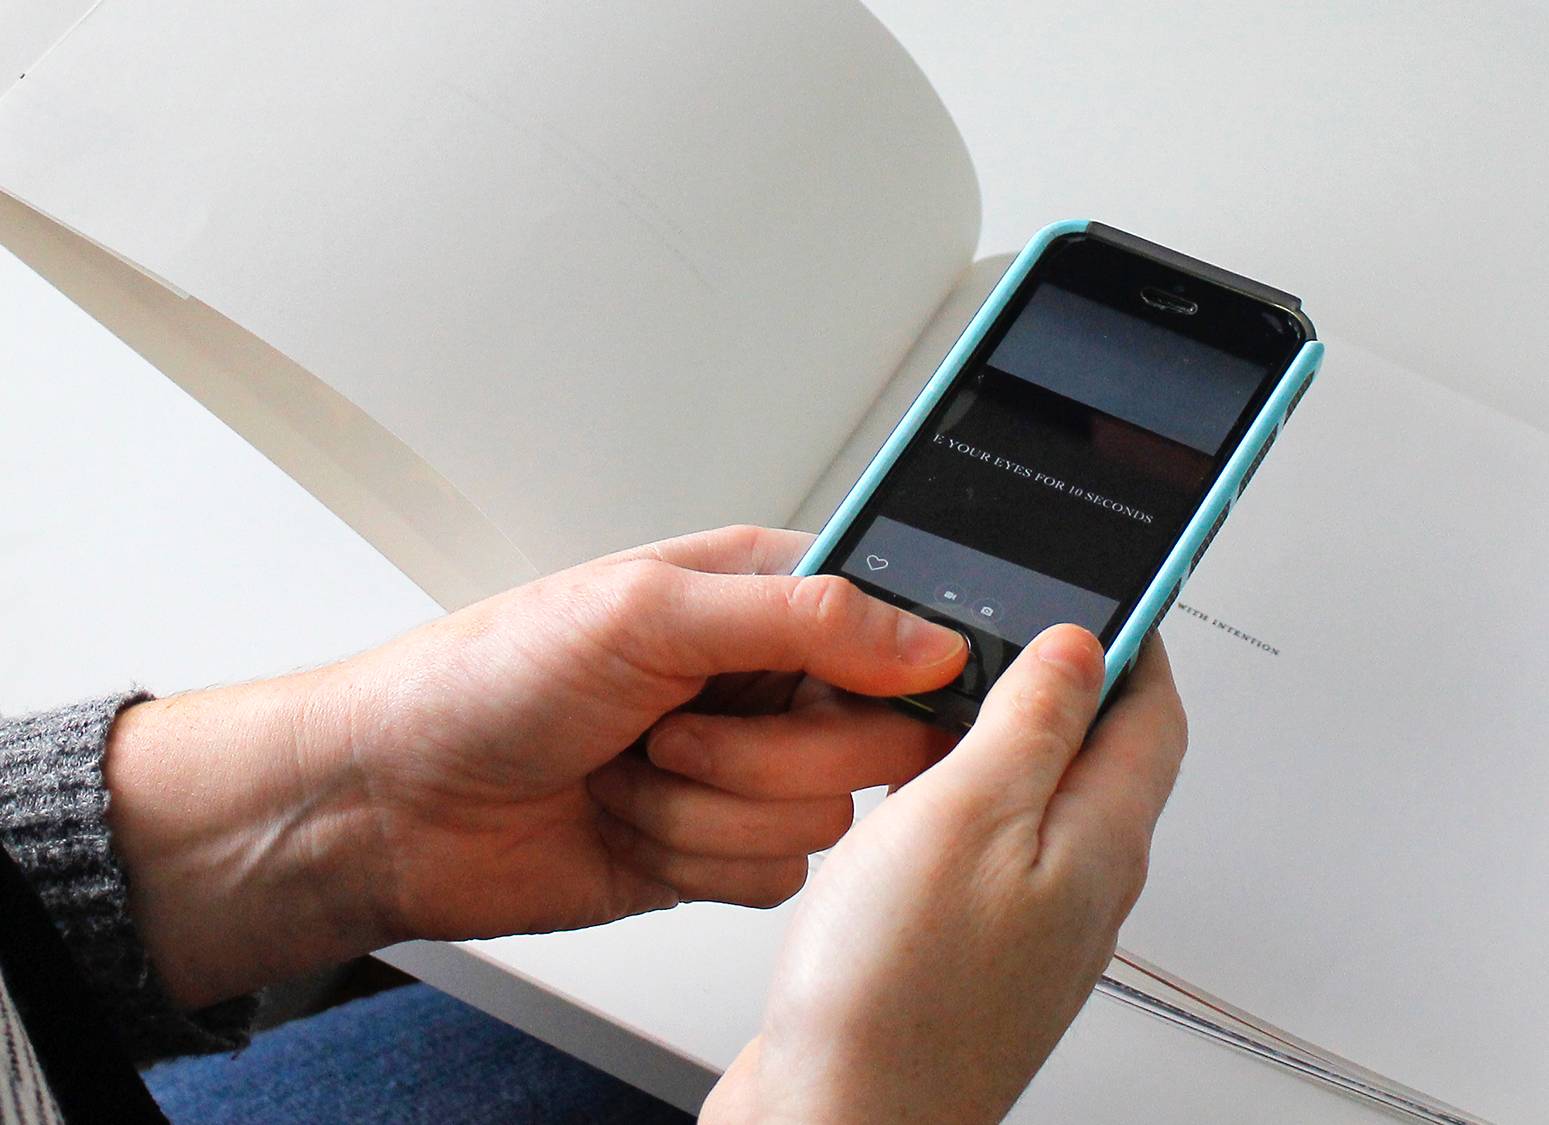 Image of person holding a mobile smart phone and pointing its camera to one of the book pages and revealing bonus content through Augmented Reality.